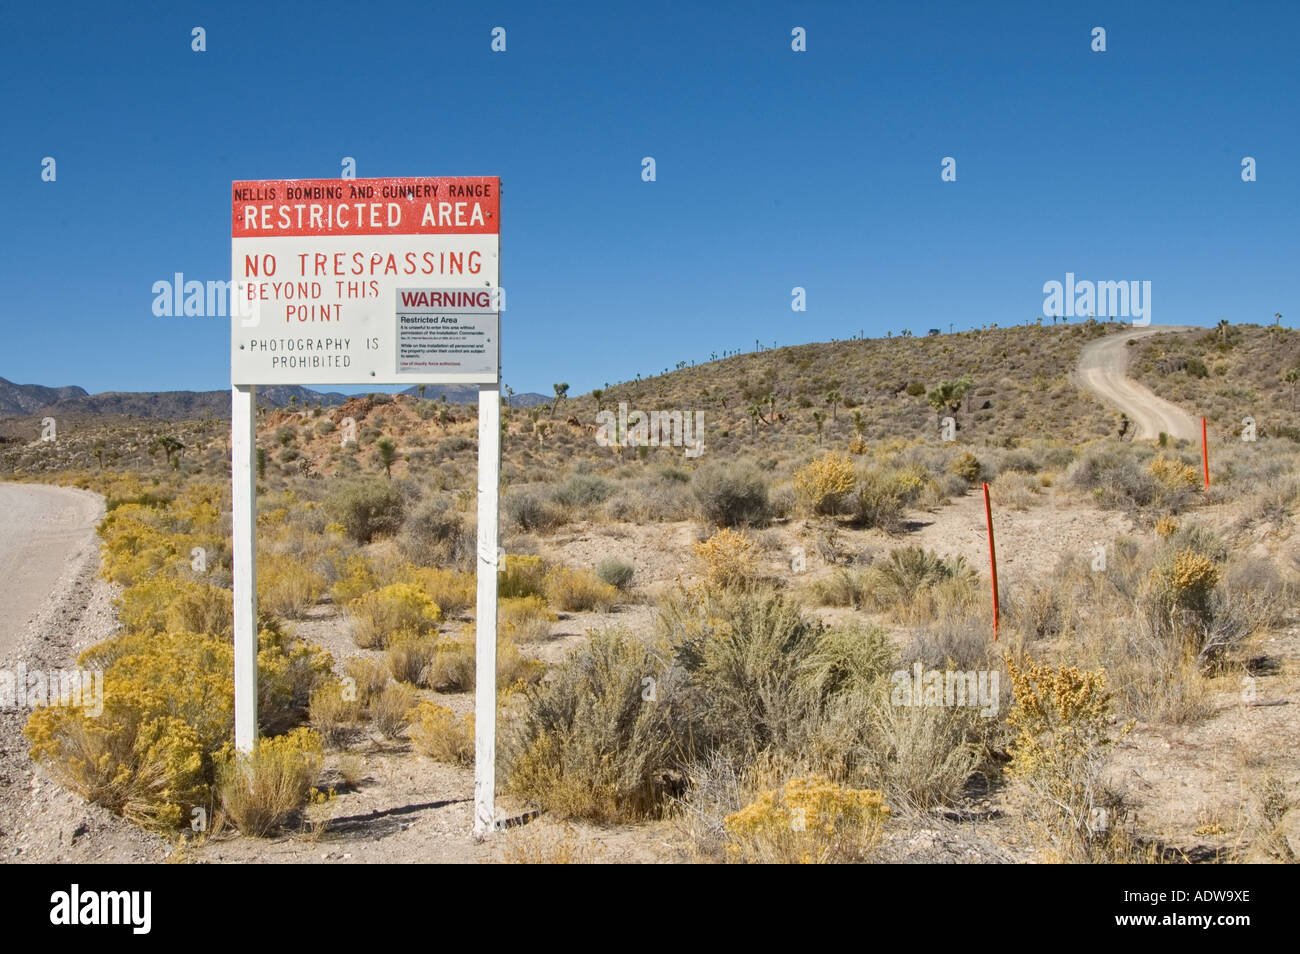 Nevada Extraterrestrial Highway Groom Lake Road entrance to Nellis Bombing and Gunnery Range Area 51 No Trespassing sign Stock Photo